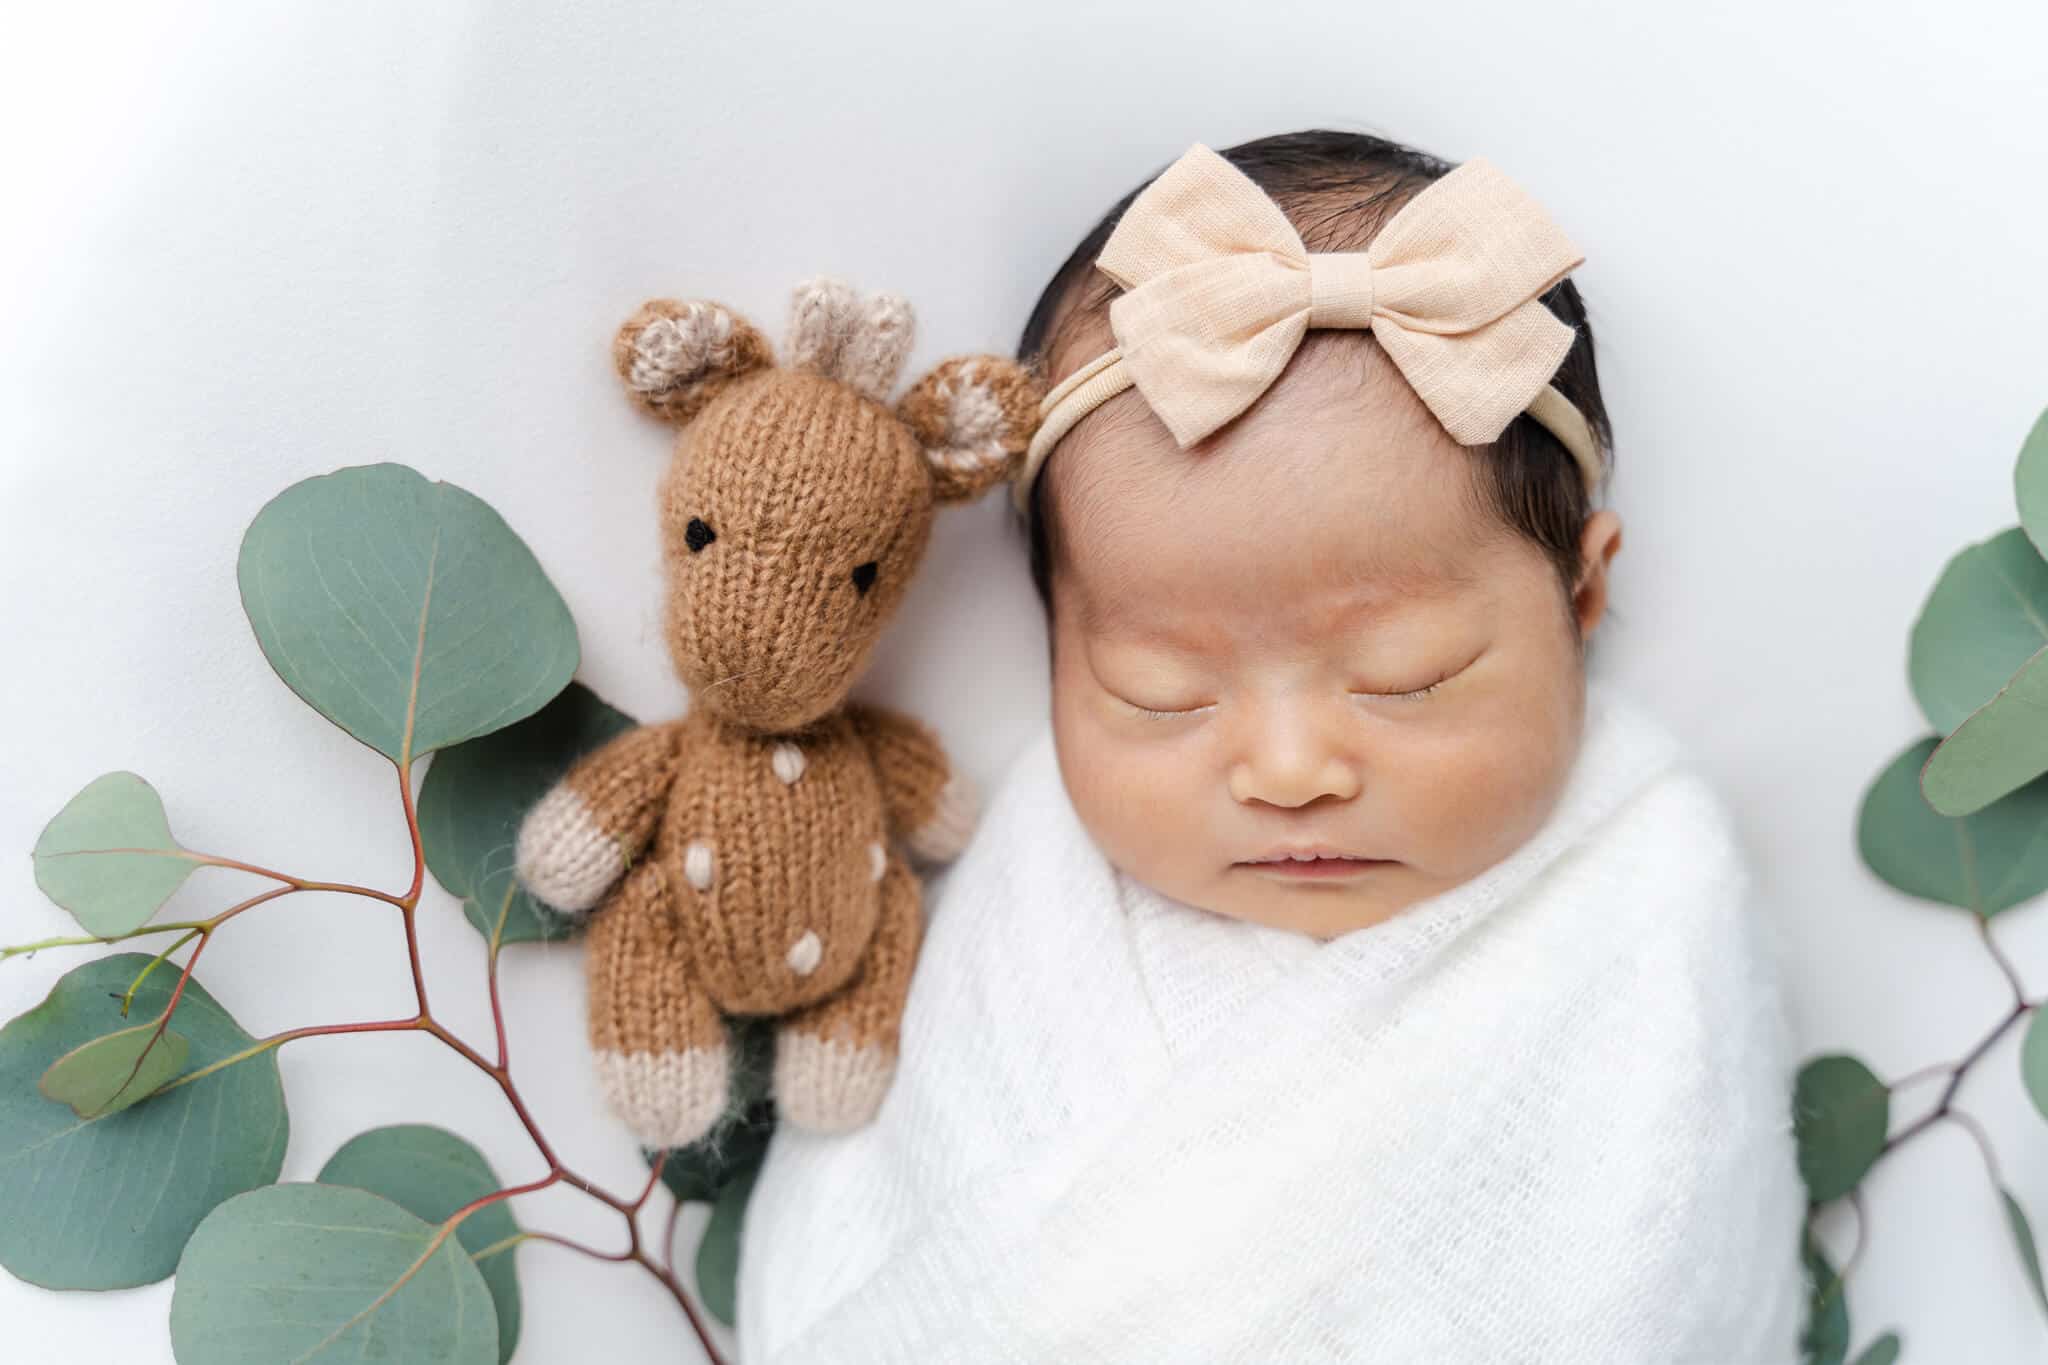 Newborn baby sleeping with a plush animal and Eucalyptus leaves on the side.